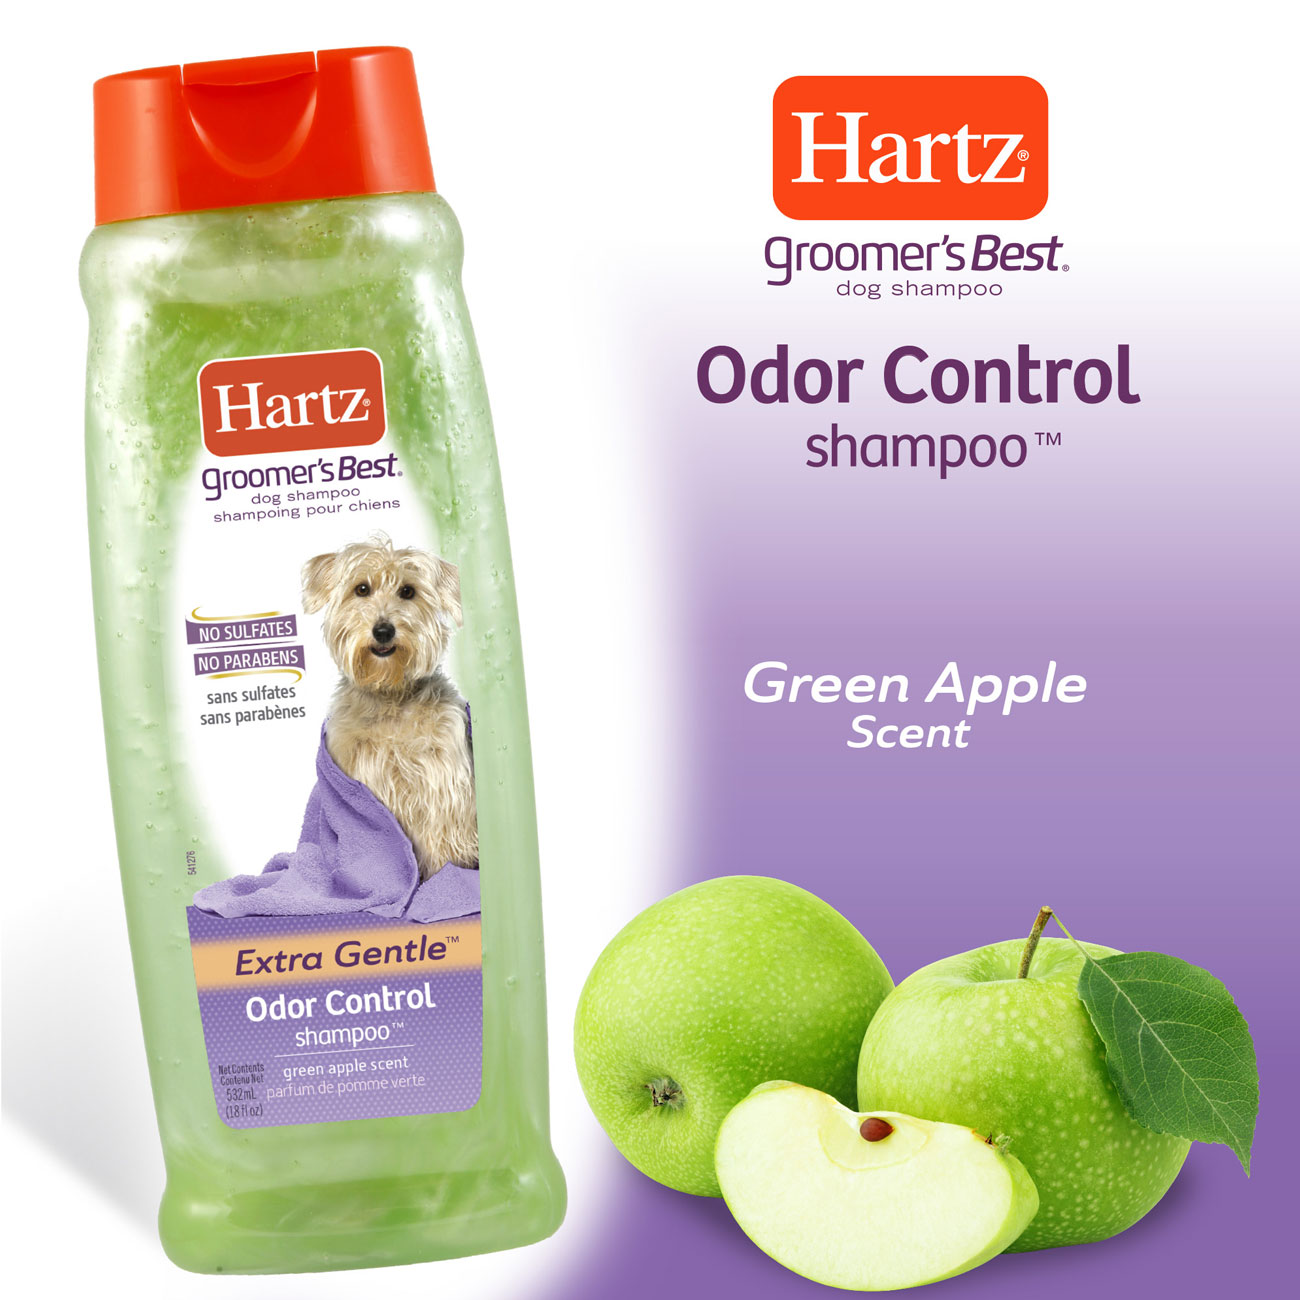 best dog shampoo and conditioner